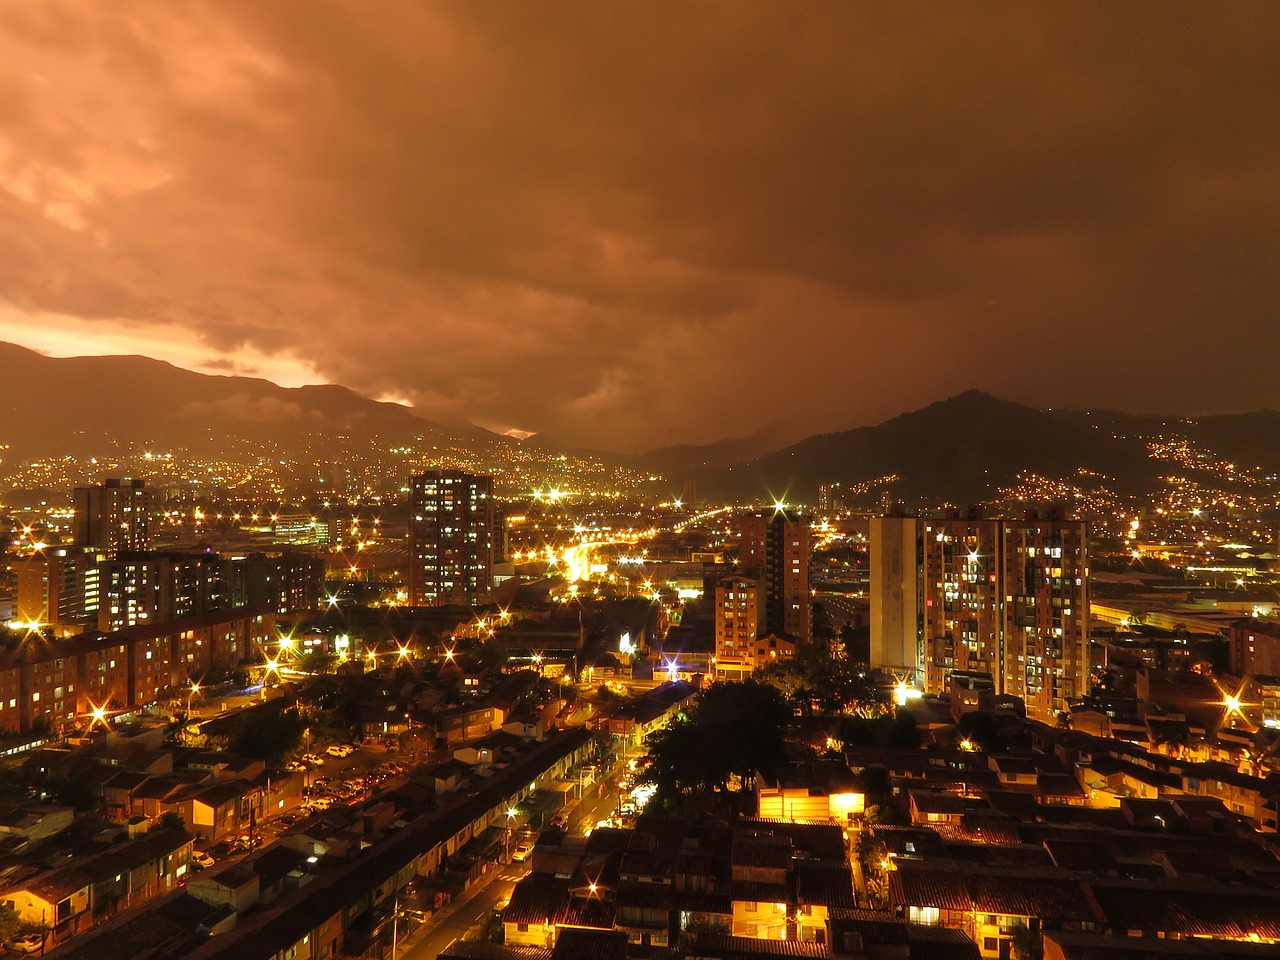 Coffee Culture and Nightlife in Medellin